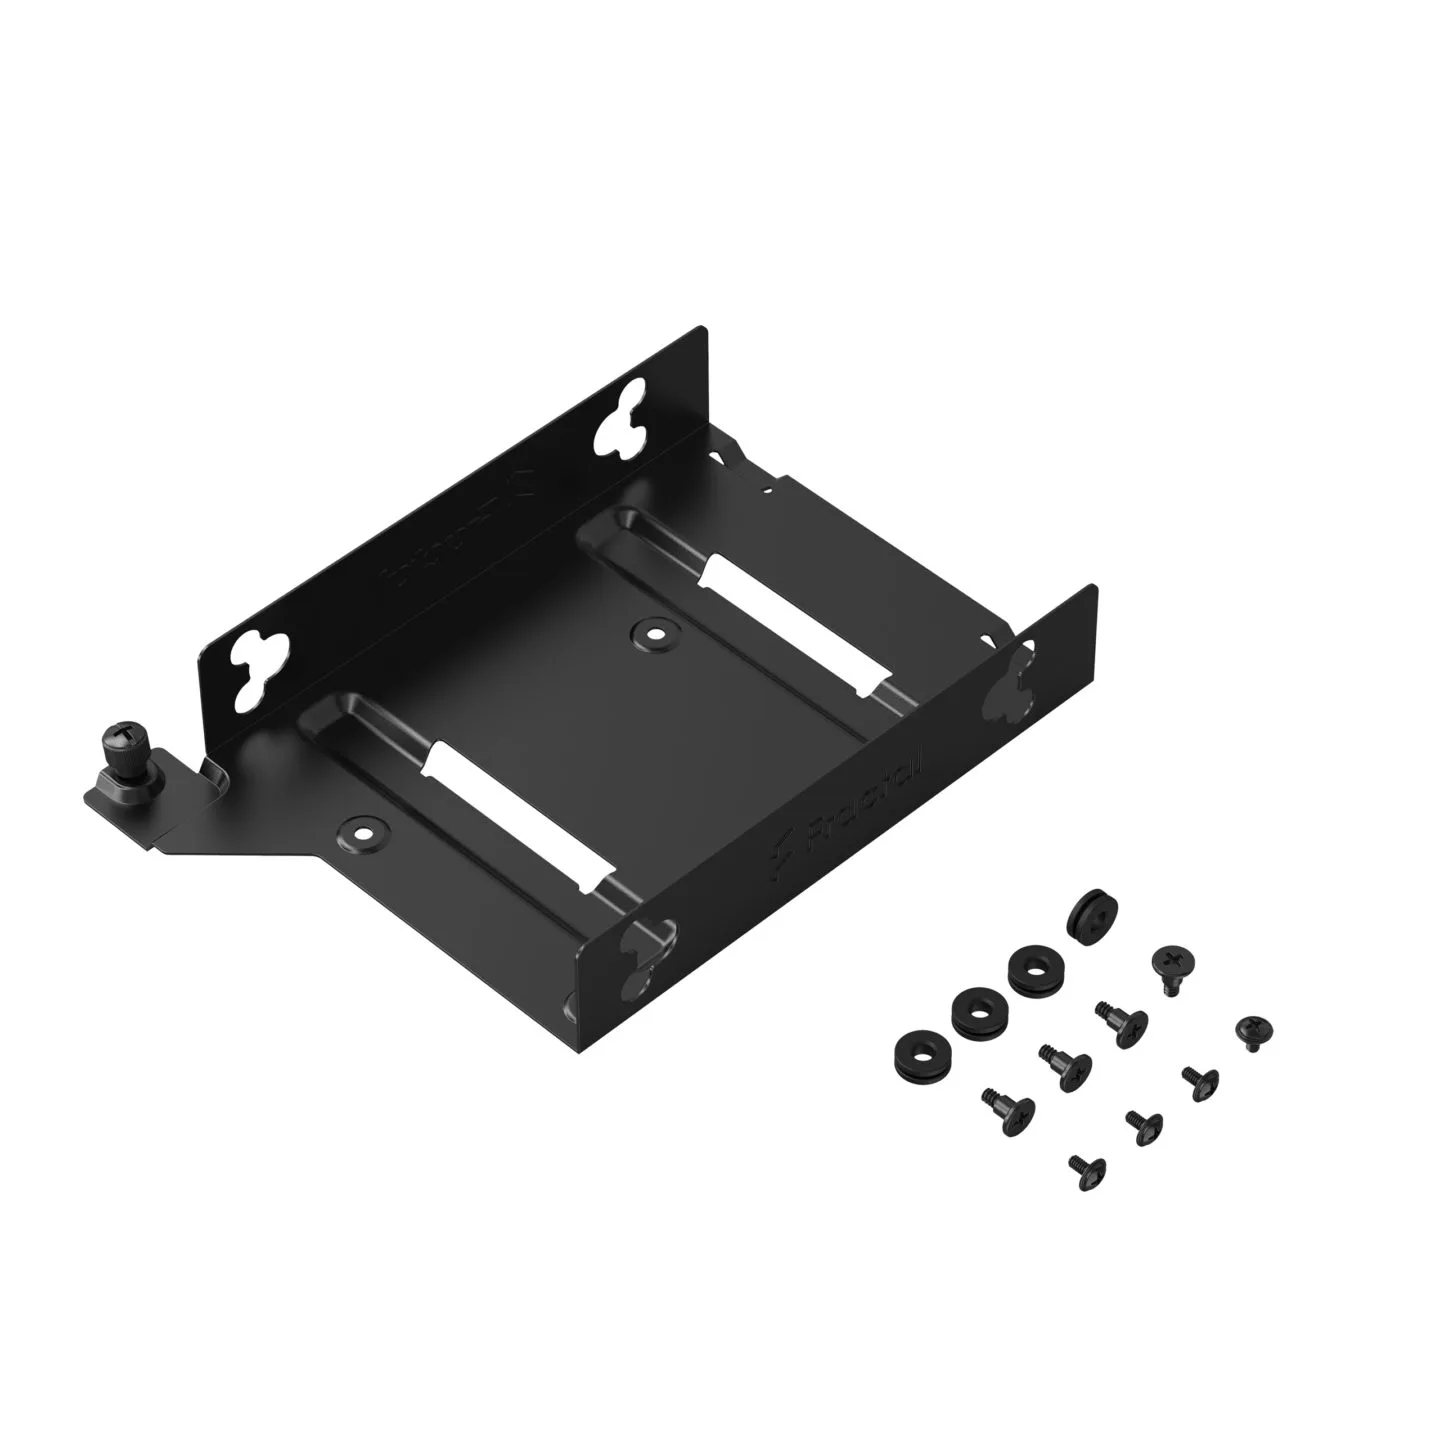 FD HDD DRIVE TRAY KIT TYPE D - image 2